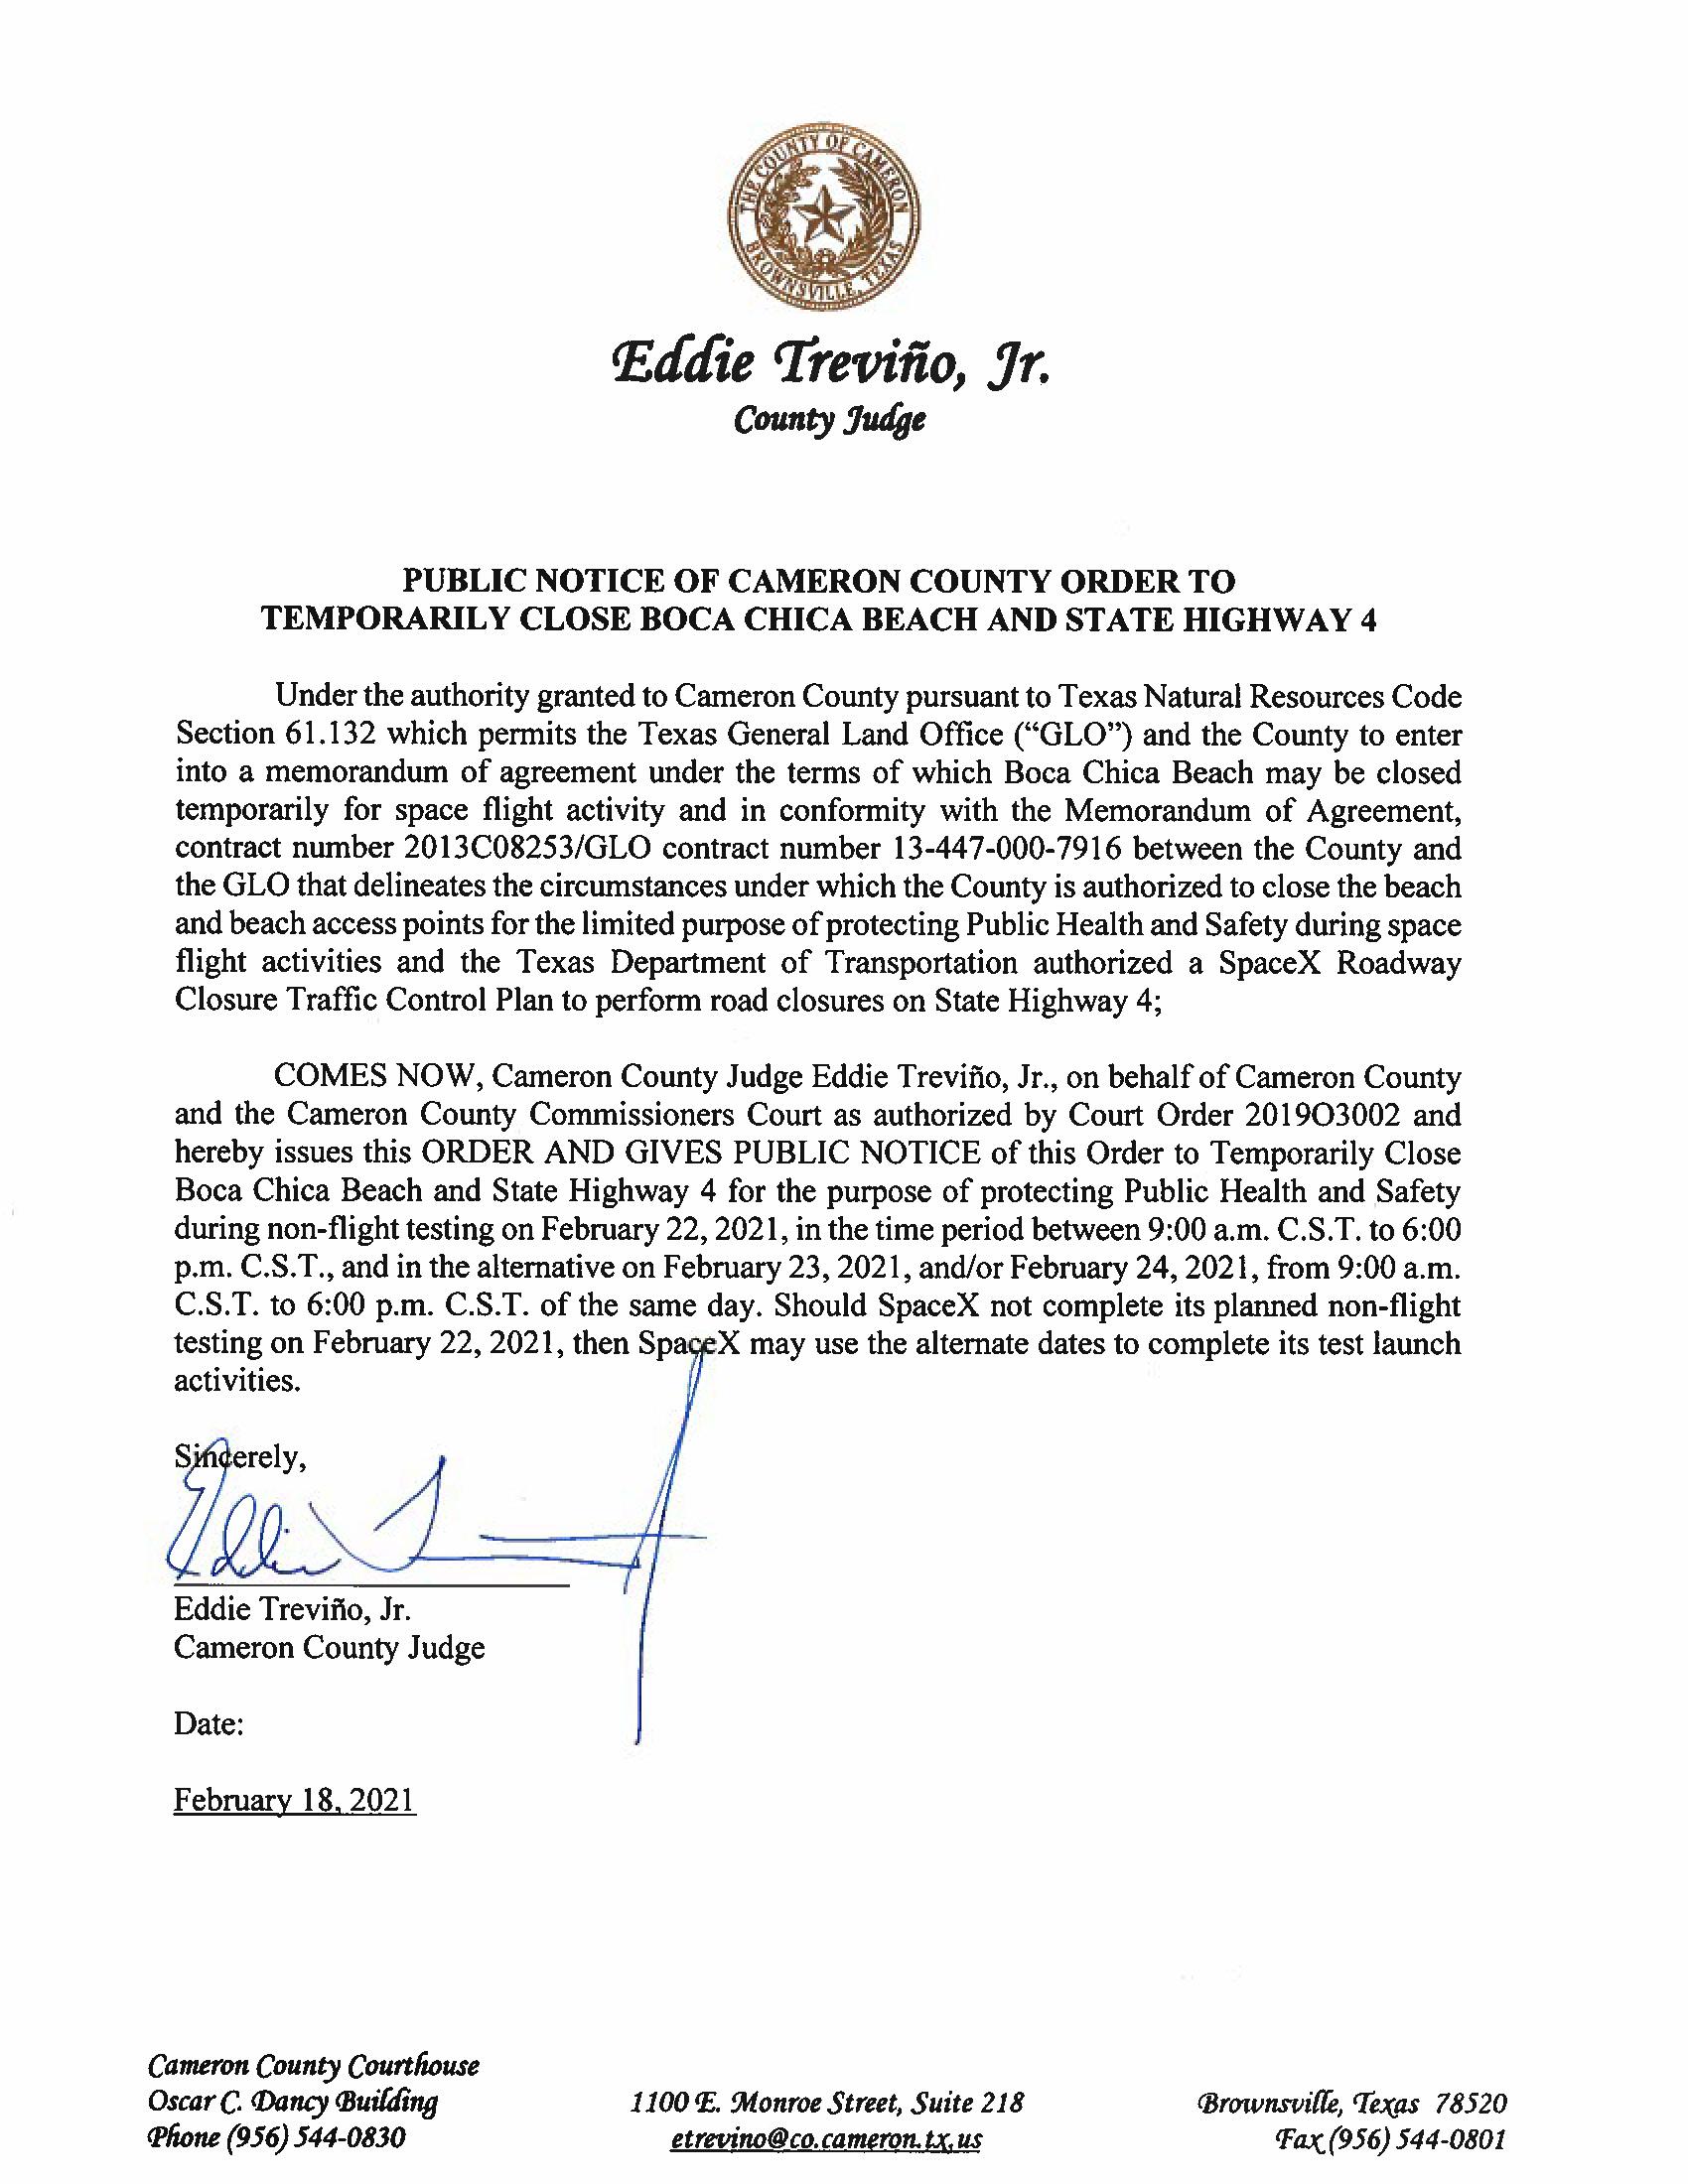 PUBLIC NOTICE OF CAMERON COUNTY ORDER TO TEMP. CLOSE BOCA CHICA BEACH AND ST. HWY 4.02.22.2021